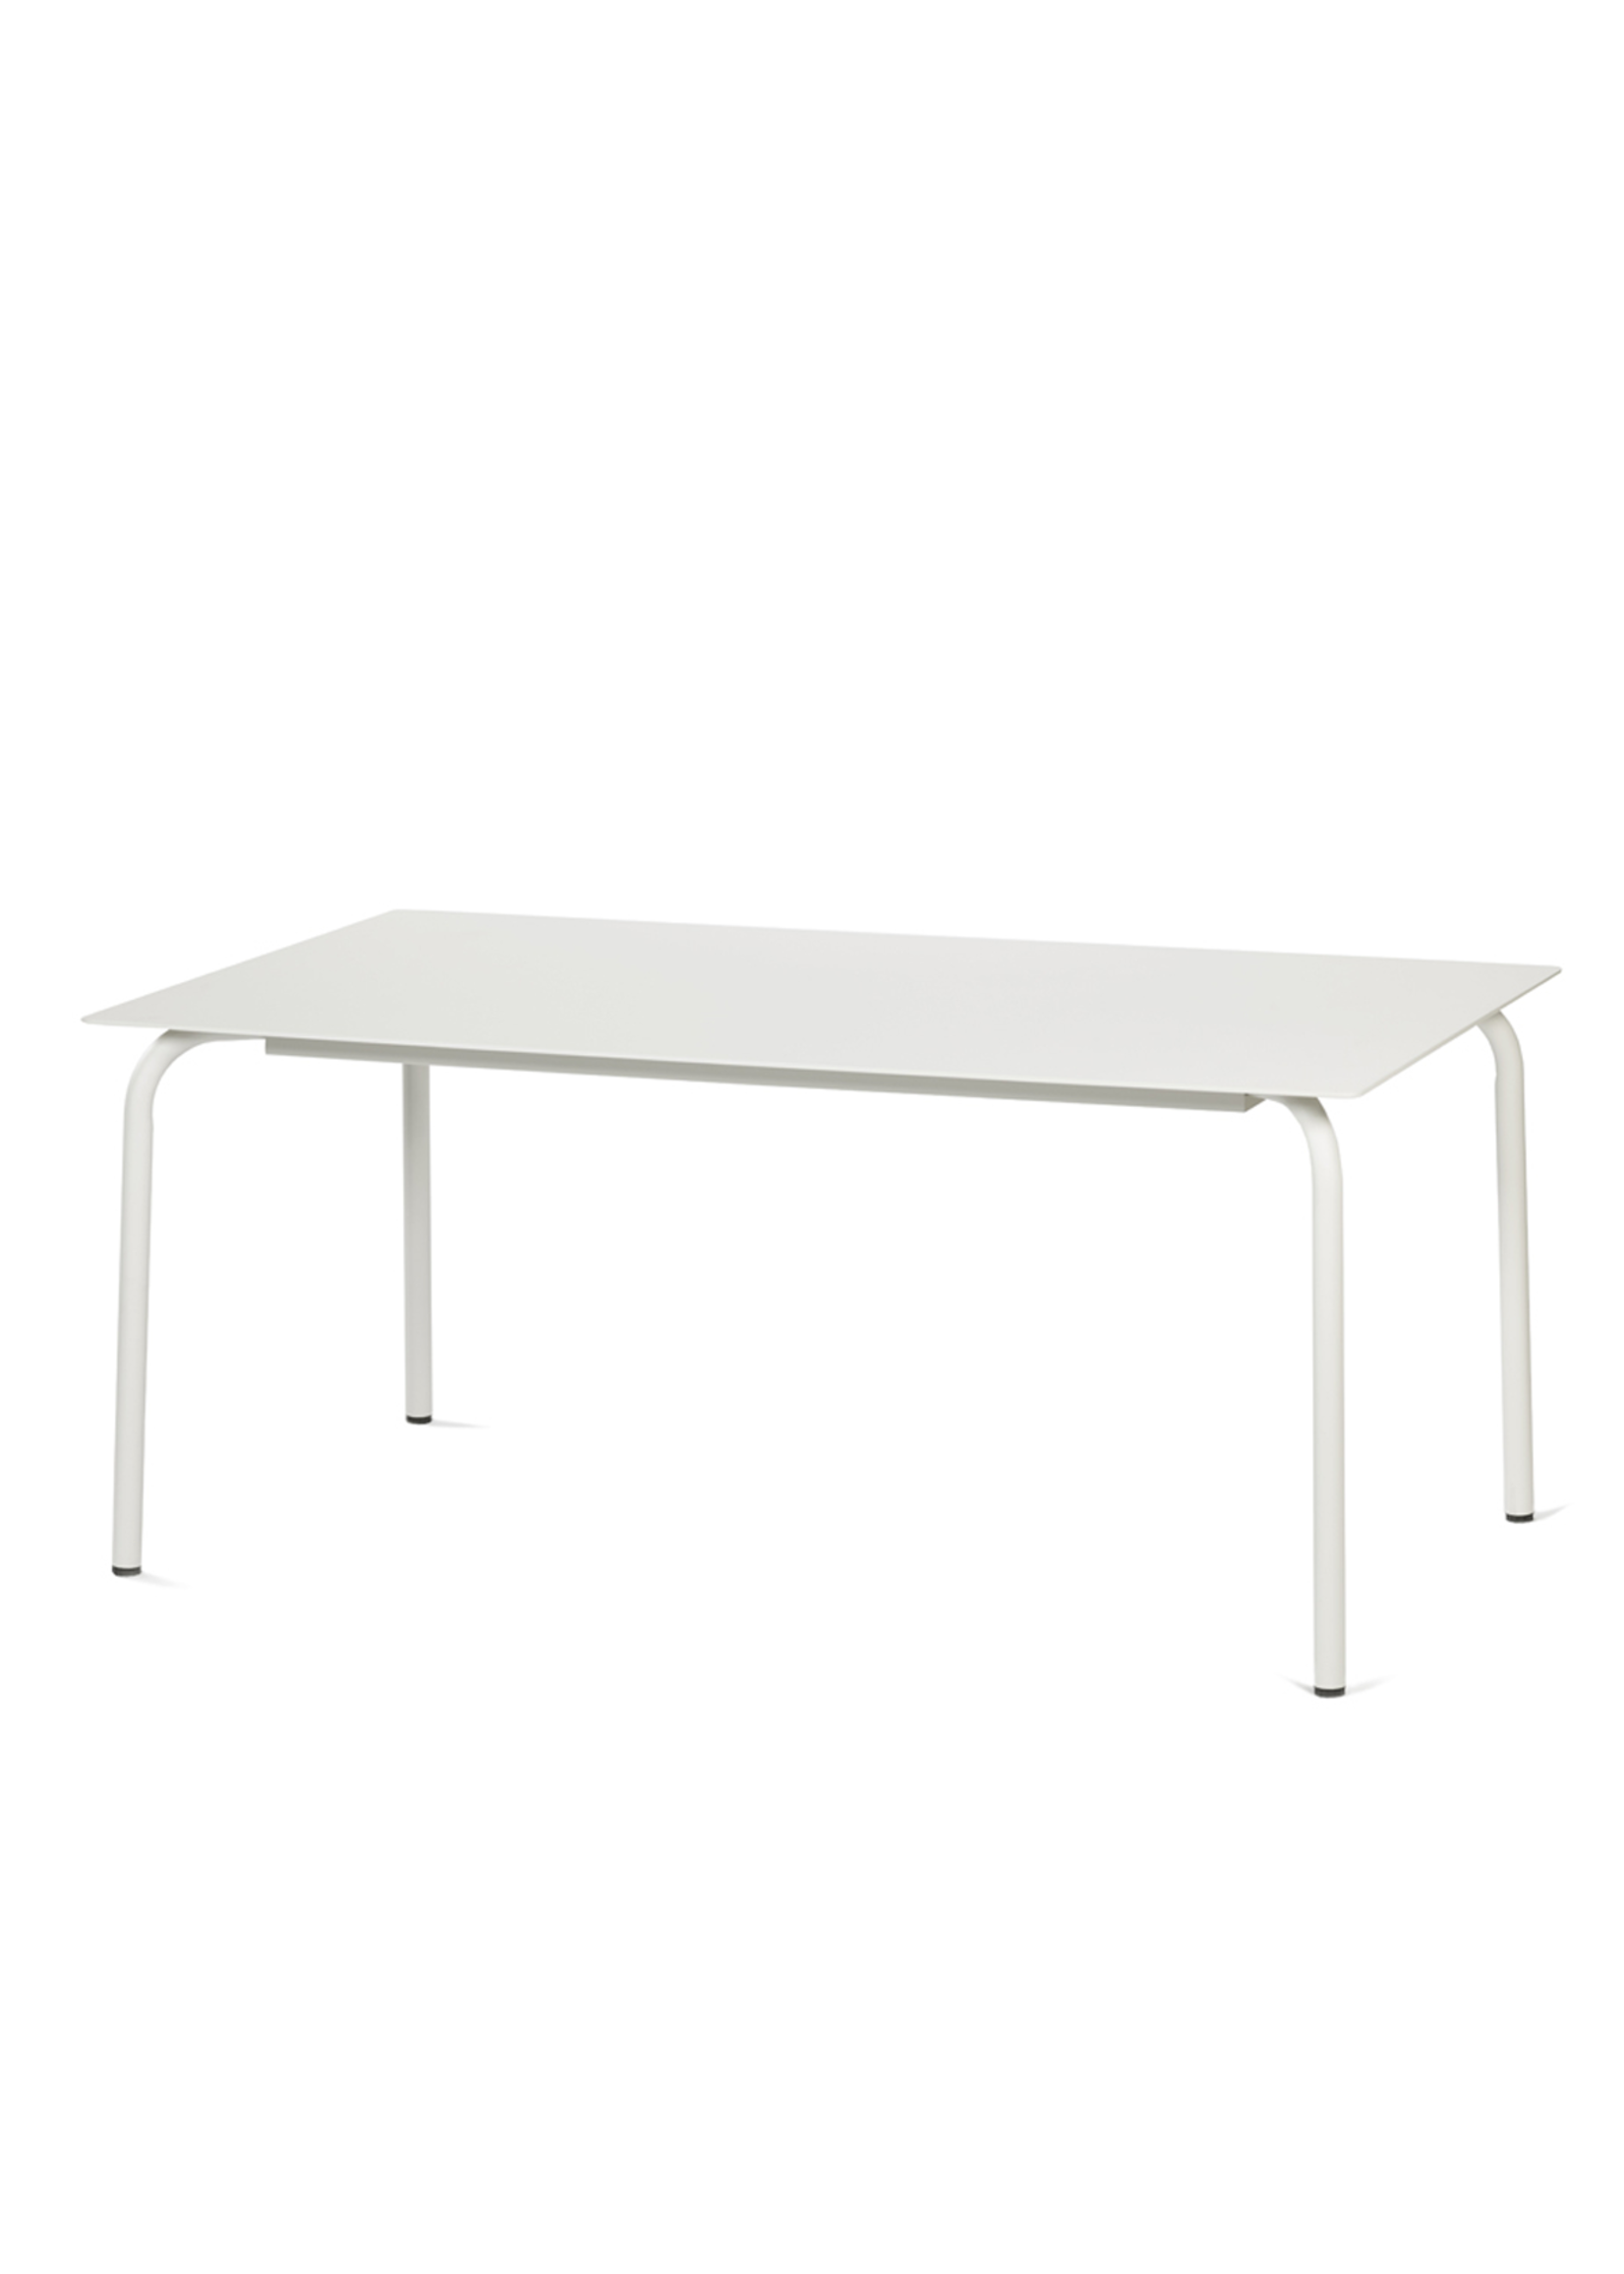 Serax August - Outdoor - Table - Sand - 170/90